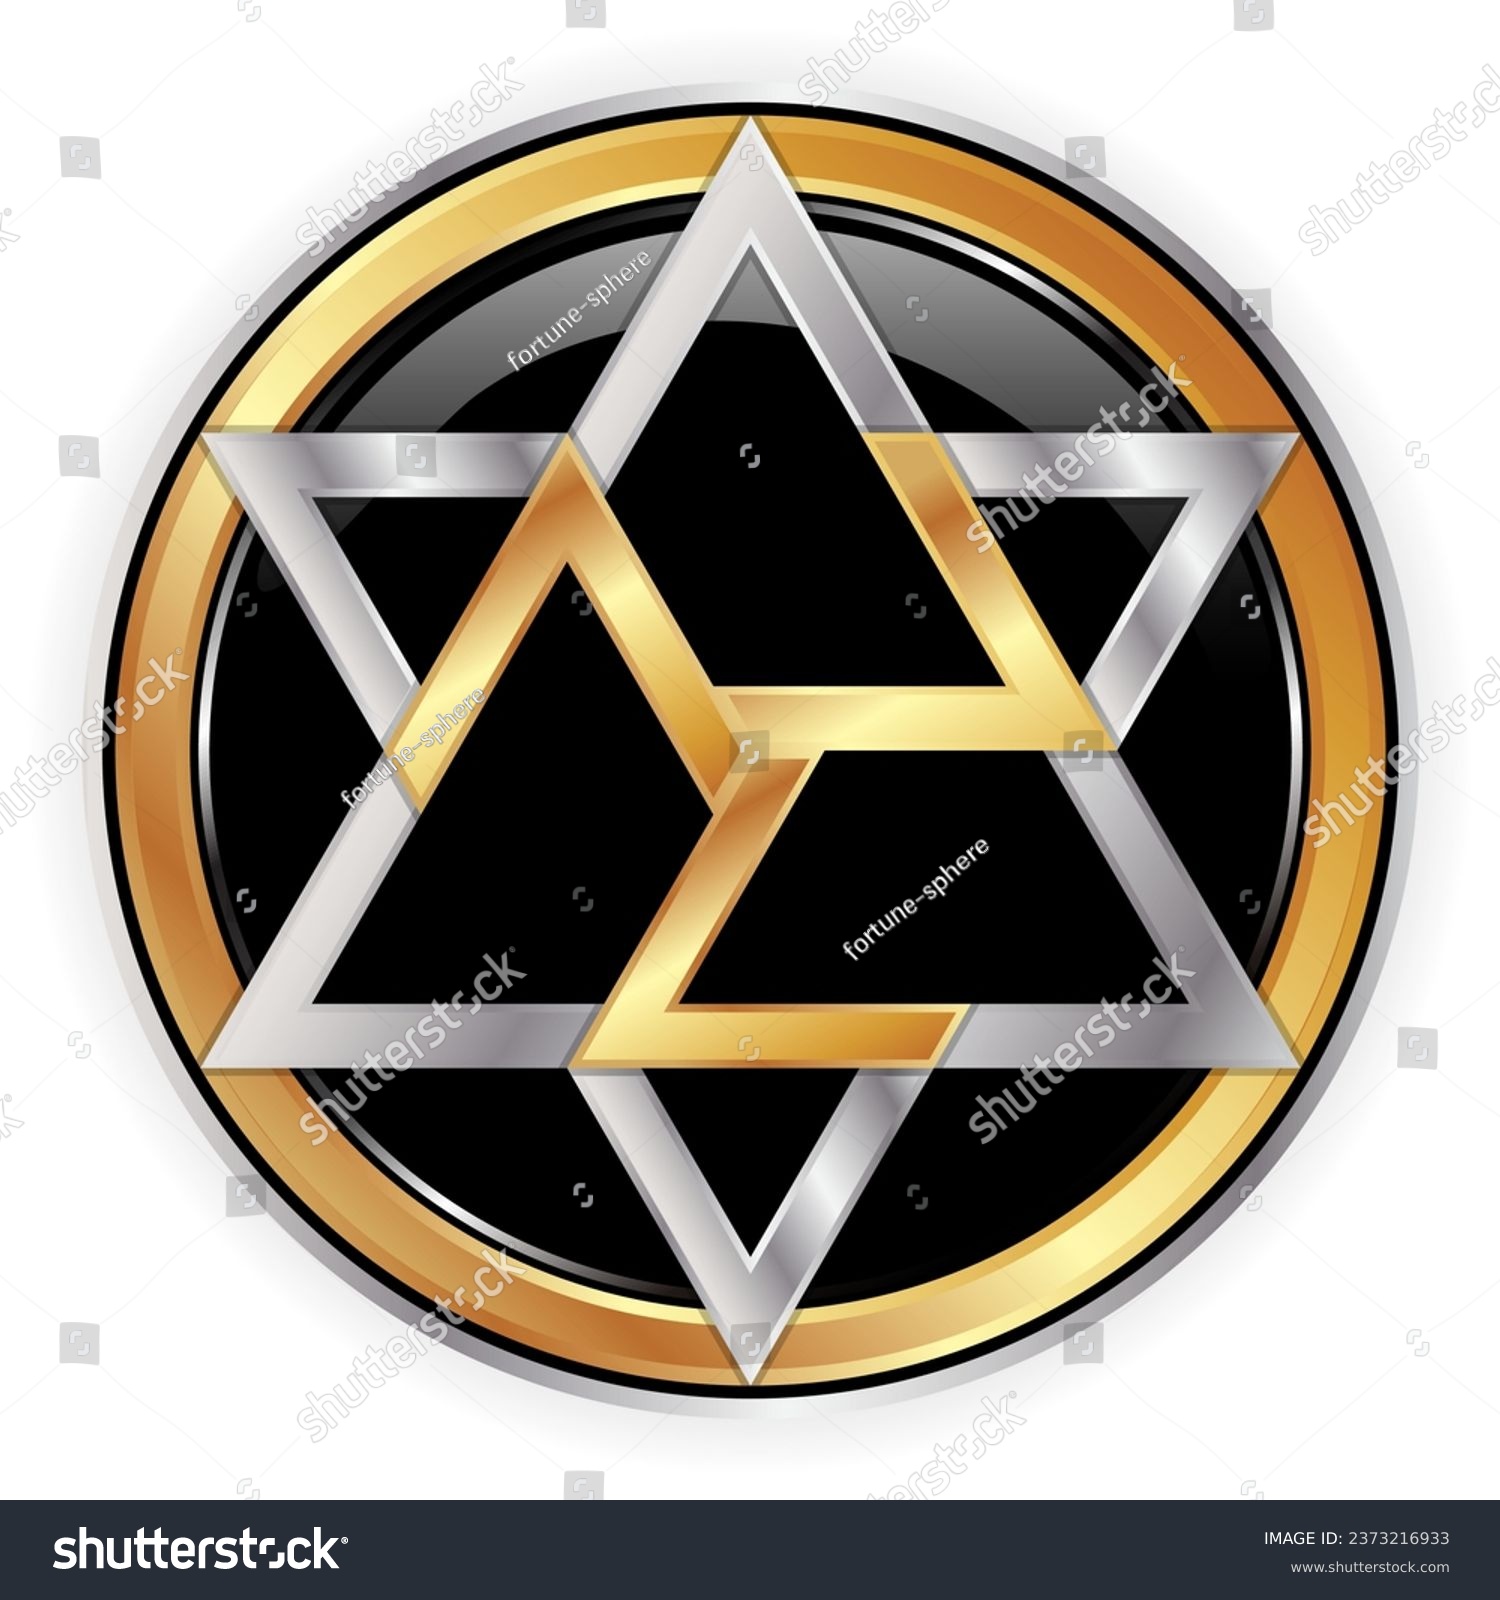 SVG of Sacred Geometry. Antahkarana  A Powerful Healing symbol used in Reiki, Hypnotherapy, Chiropractic Treatment,  Yoga and Meditation. Amulet with Three Sevens Within a Sircle. Jewelry. svg